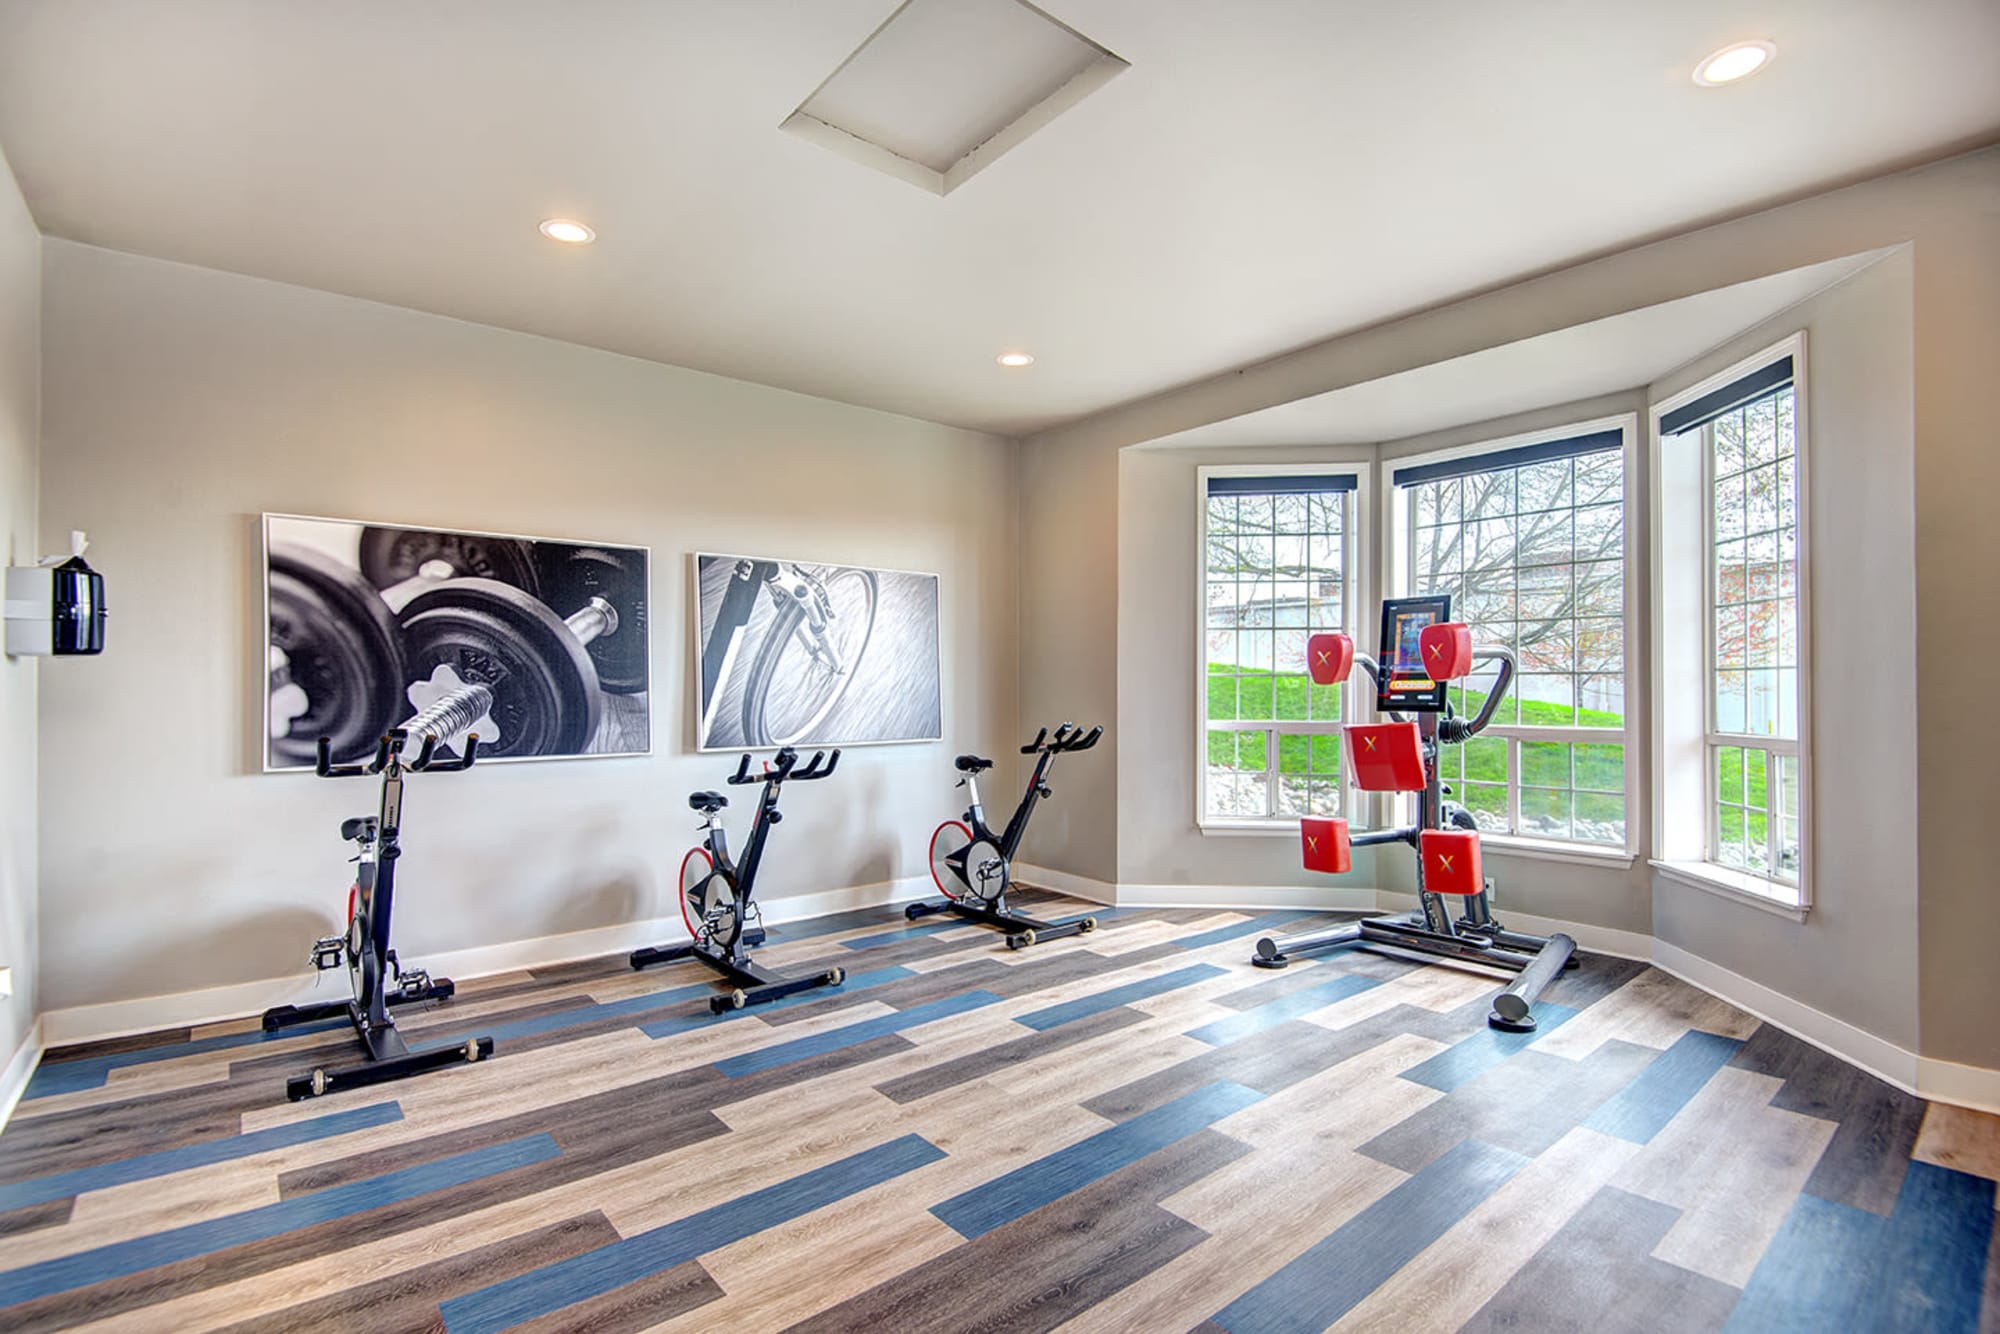 A workout room at Wellington Apartment Homes in Silverdale, Washington